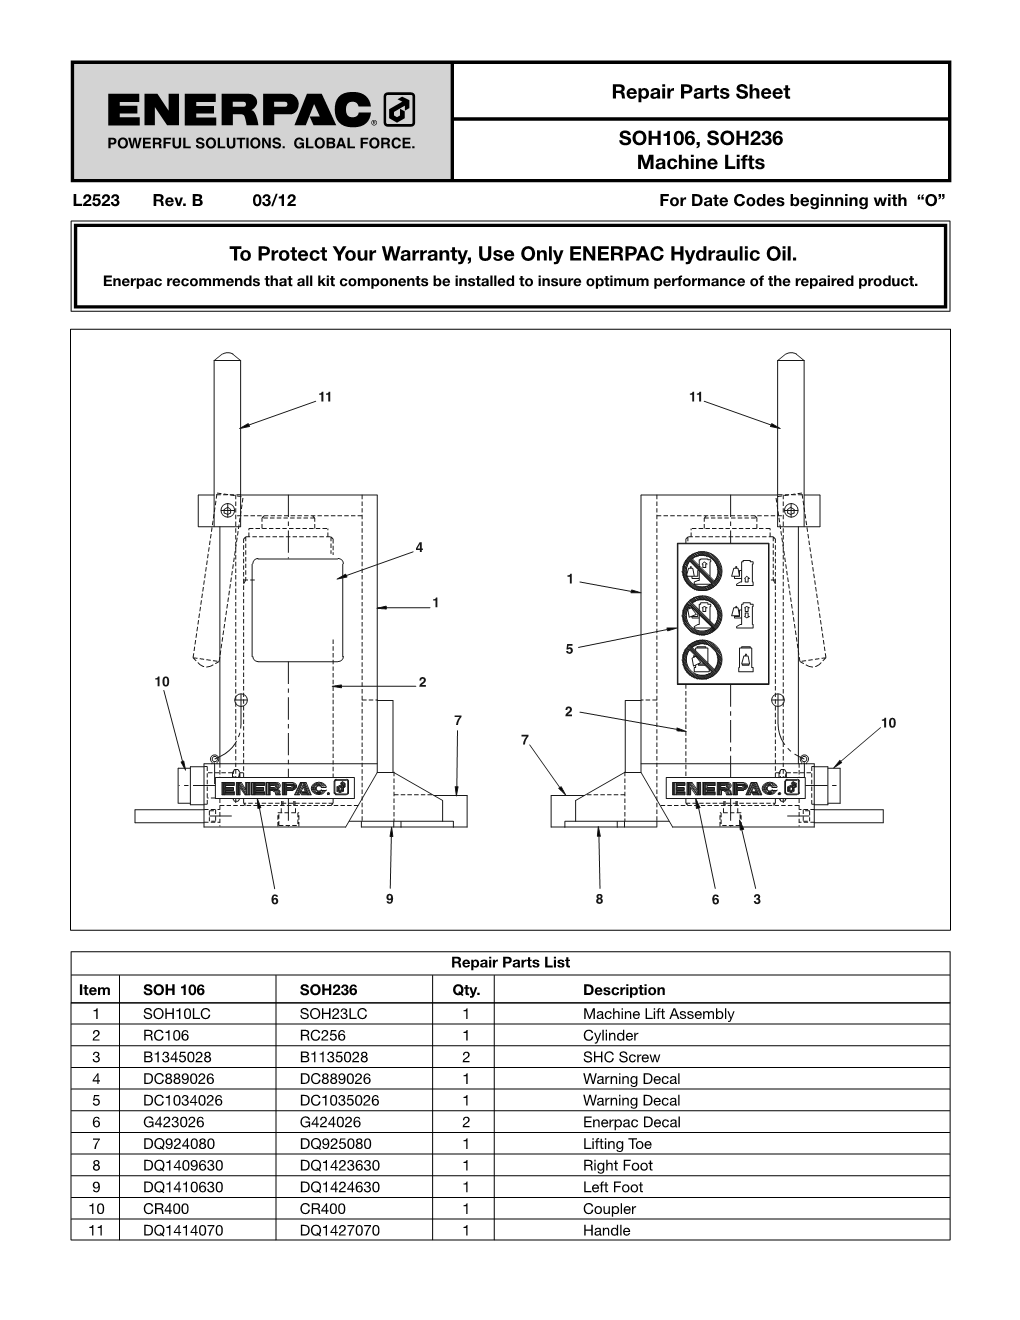 Repair Parts Sheet SOH106, SOH236 Machine Lifts to Protect Your